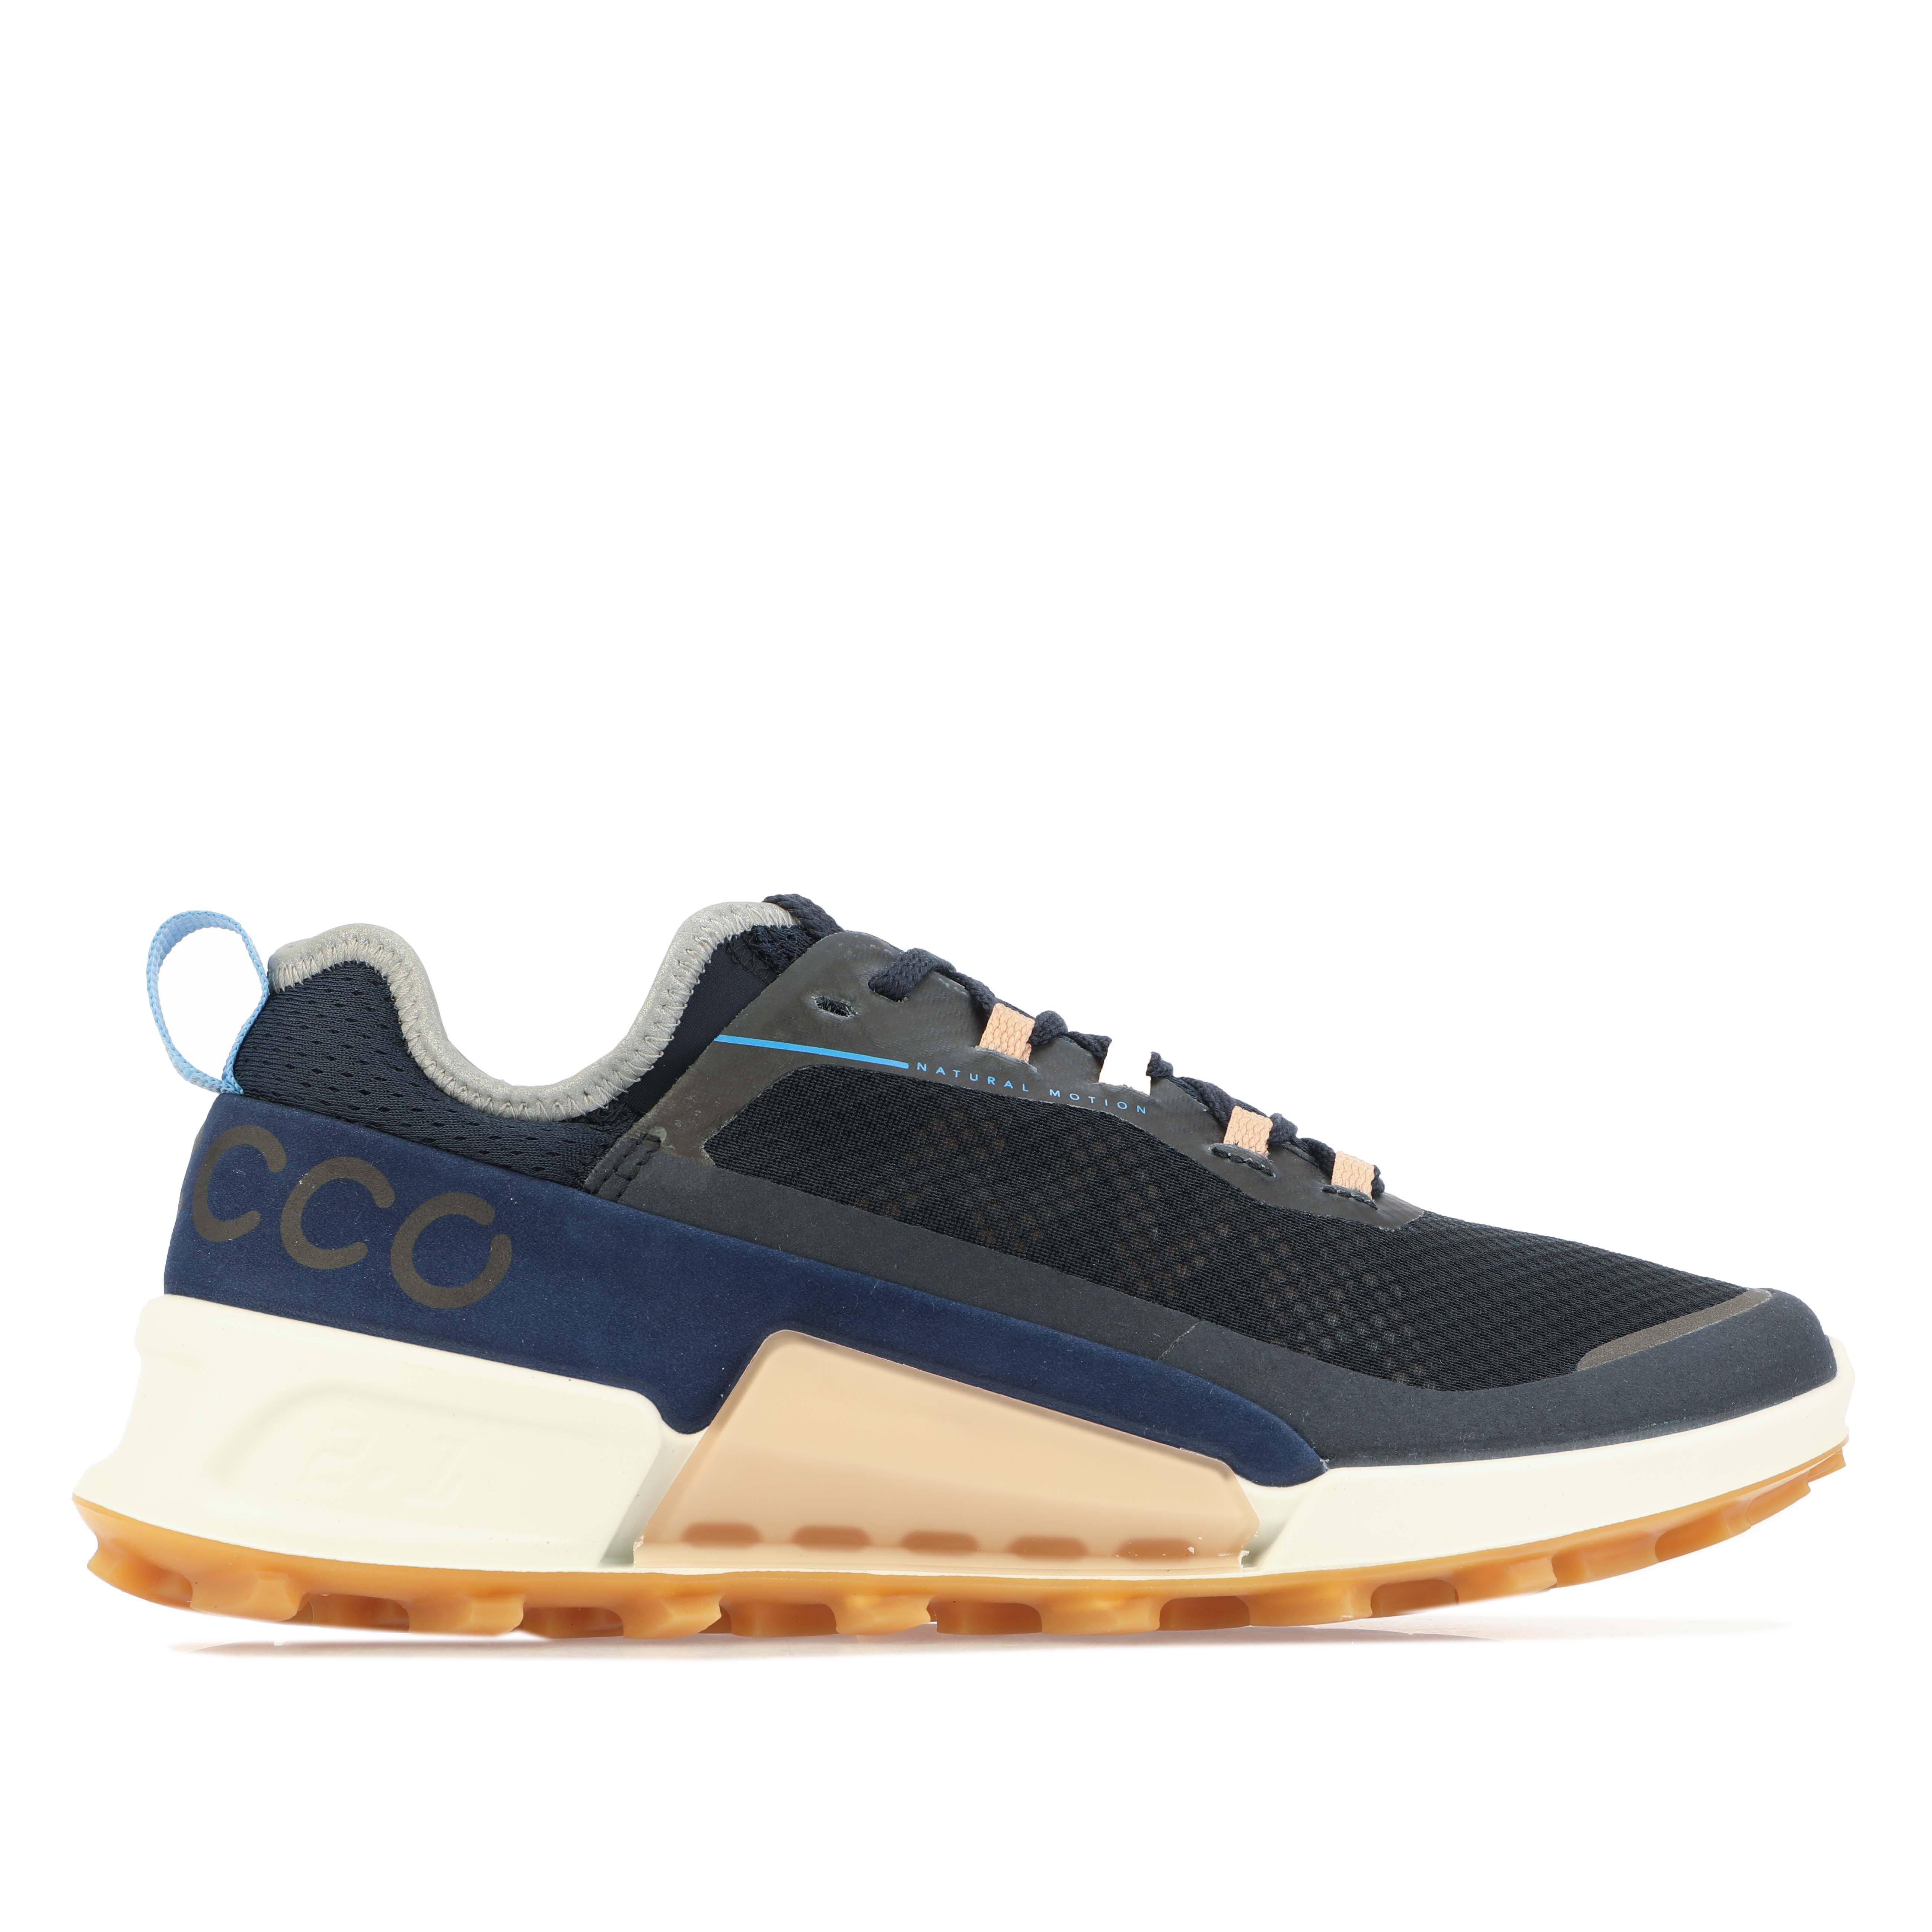 Womens Biom 2.1 X Country Trainers